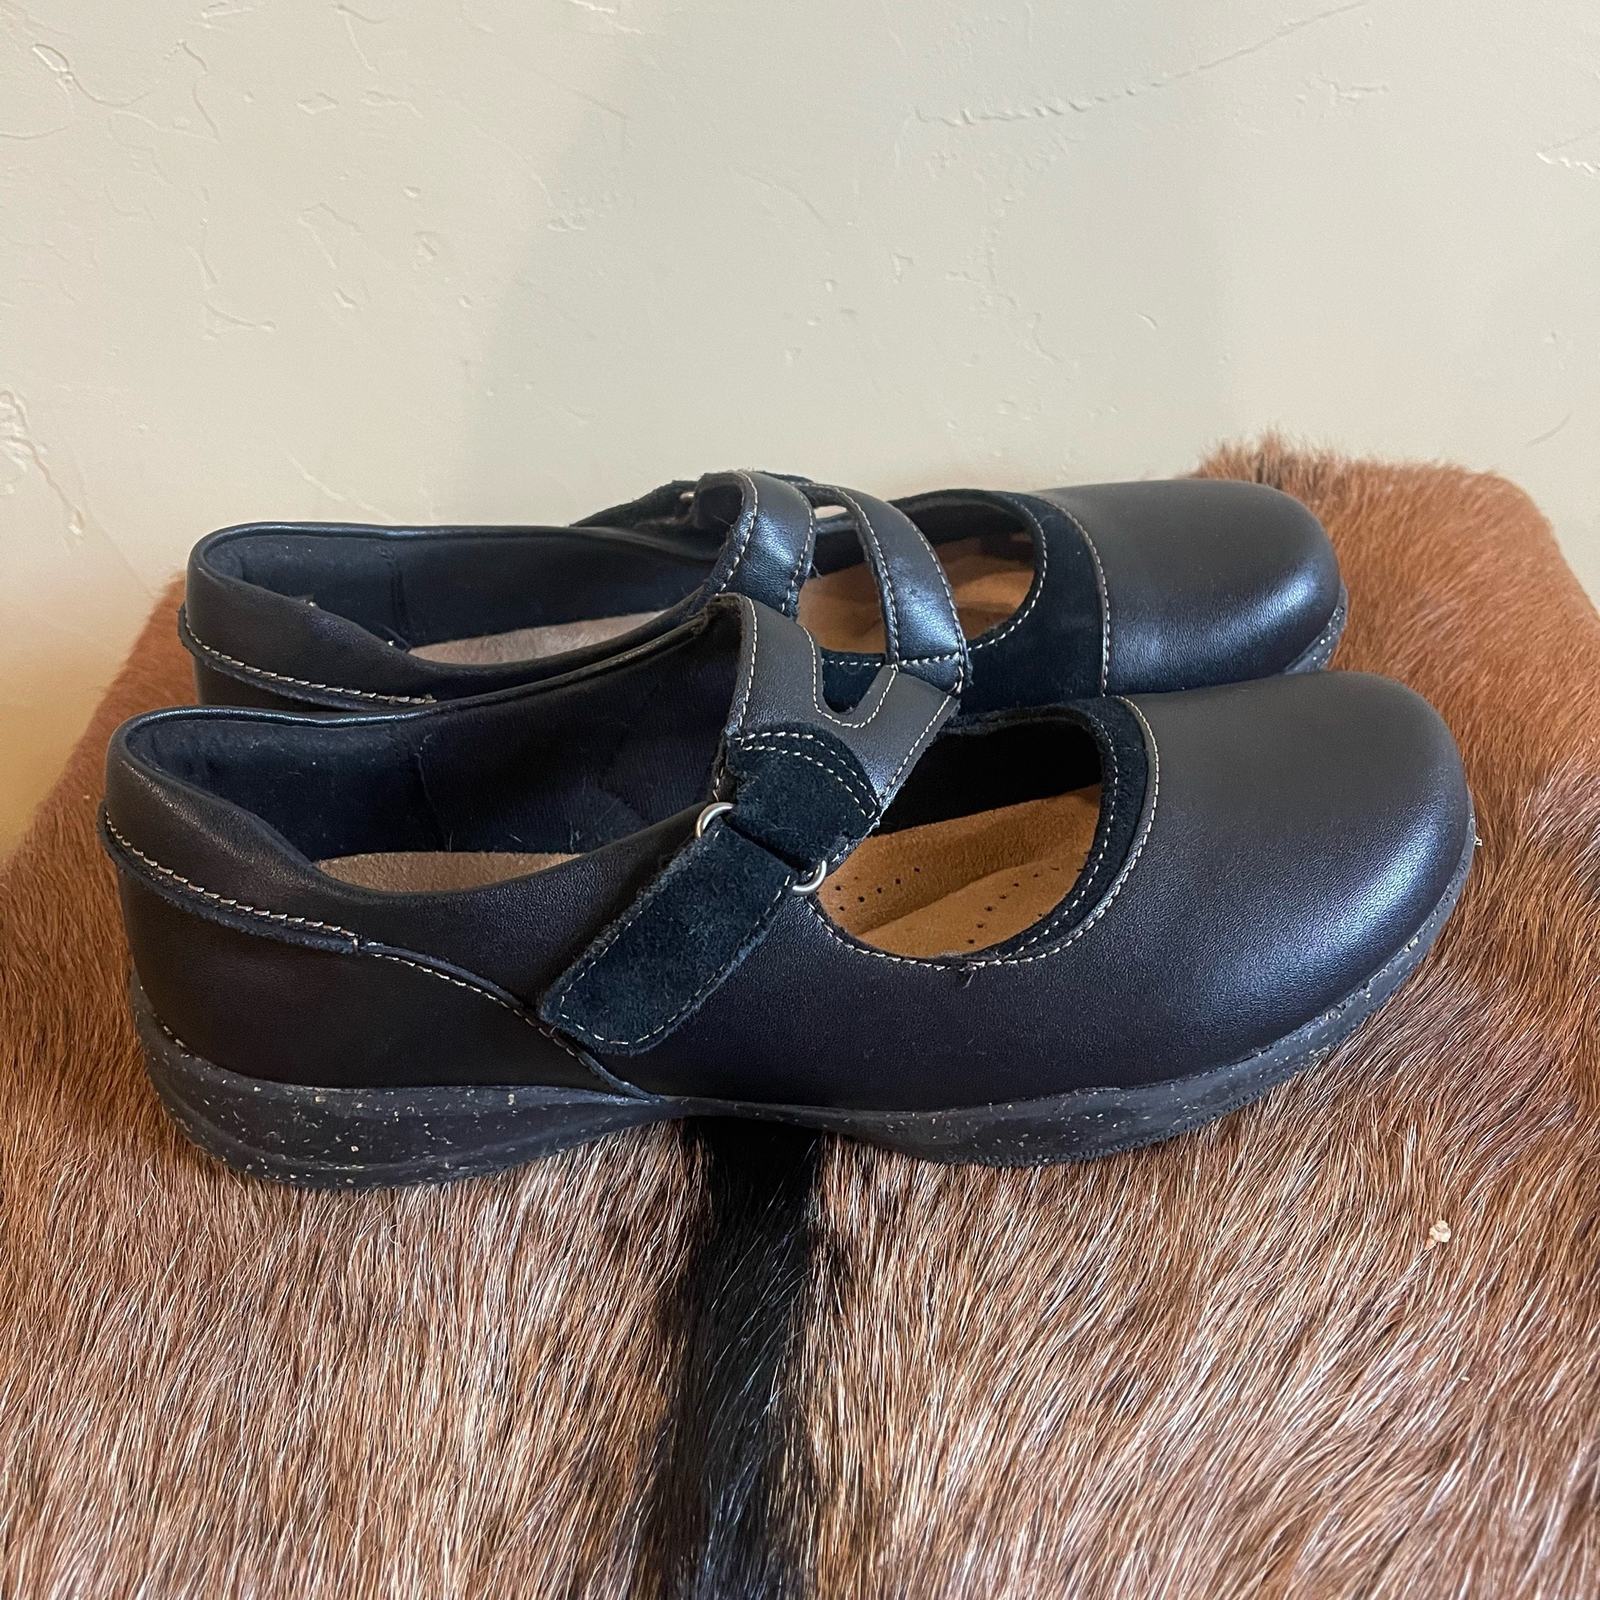 Primary image for Clarks $90 Black Leather Roseville Jane Women's Mary Jane Shoes US 9.5